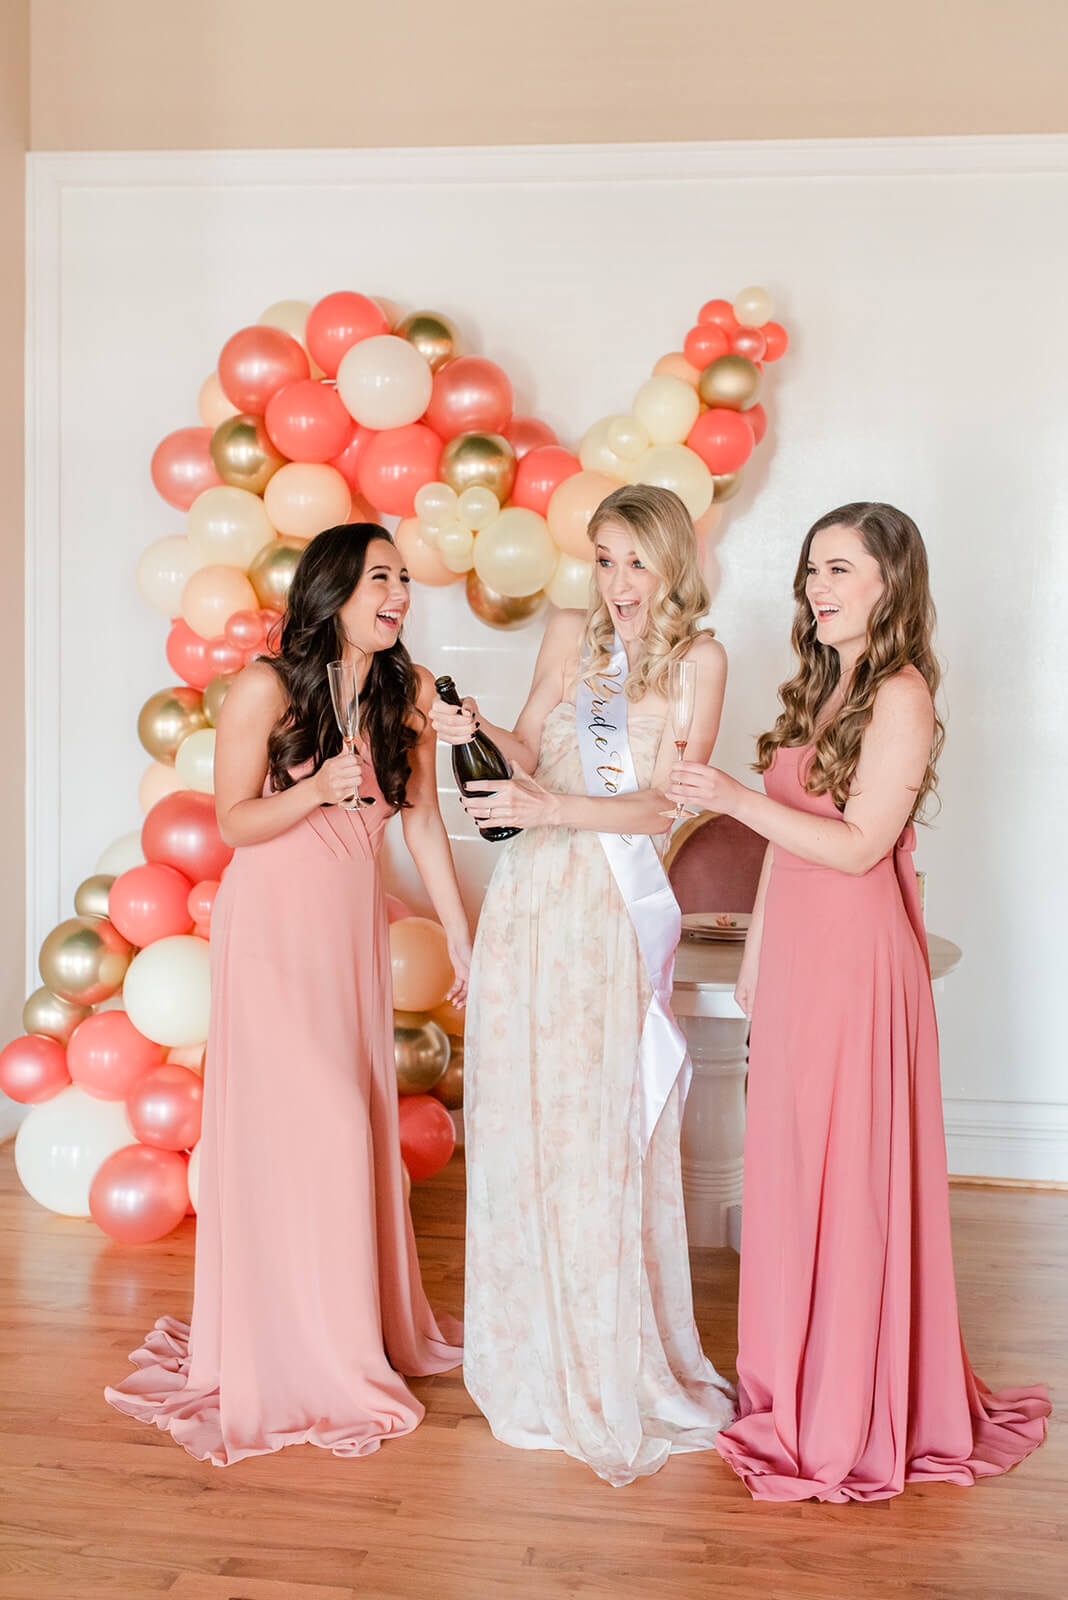 three women in long dresses celebrating at a party